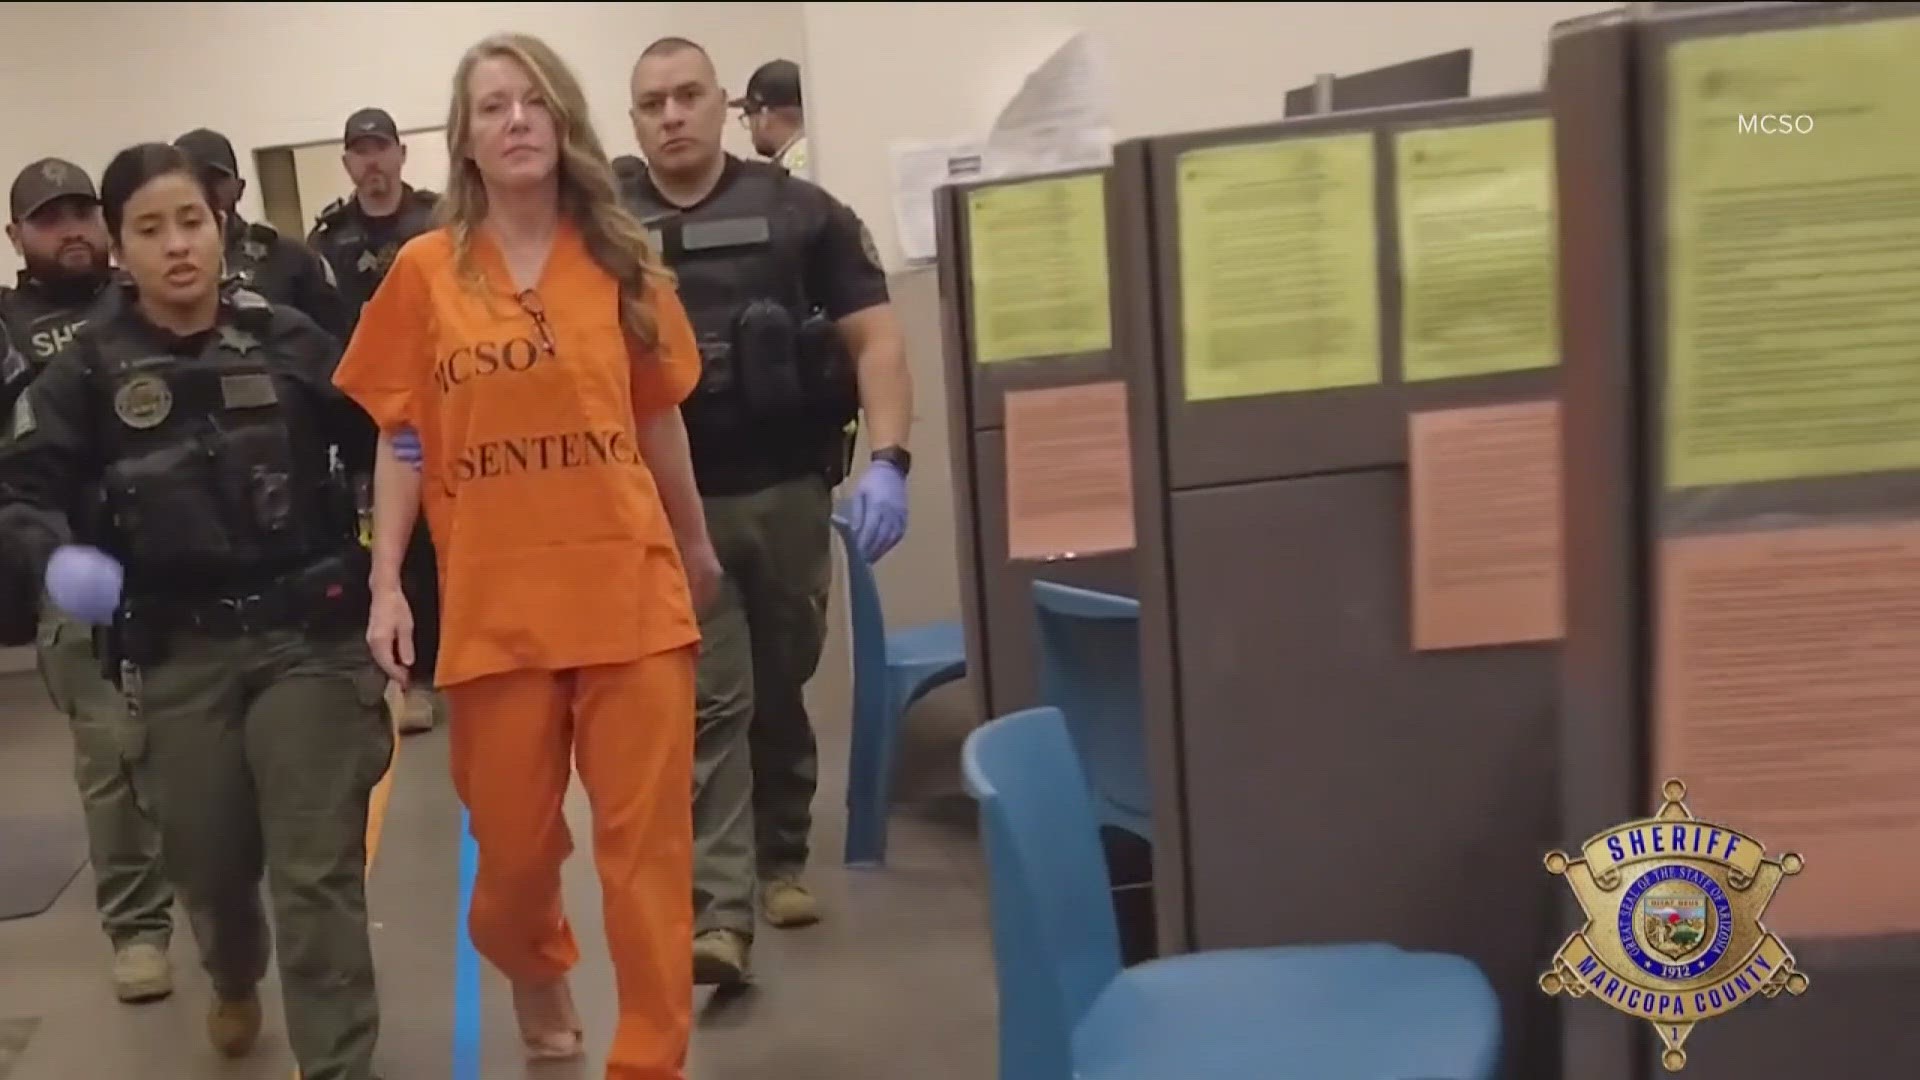 In Arizona, she's facing charges of conspiring to kill her first husband among other charges.